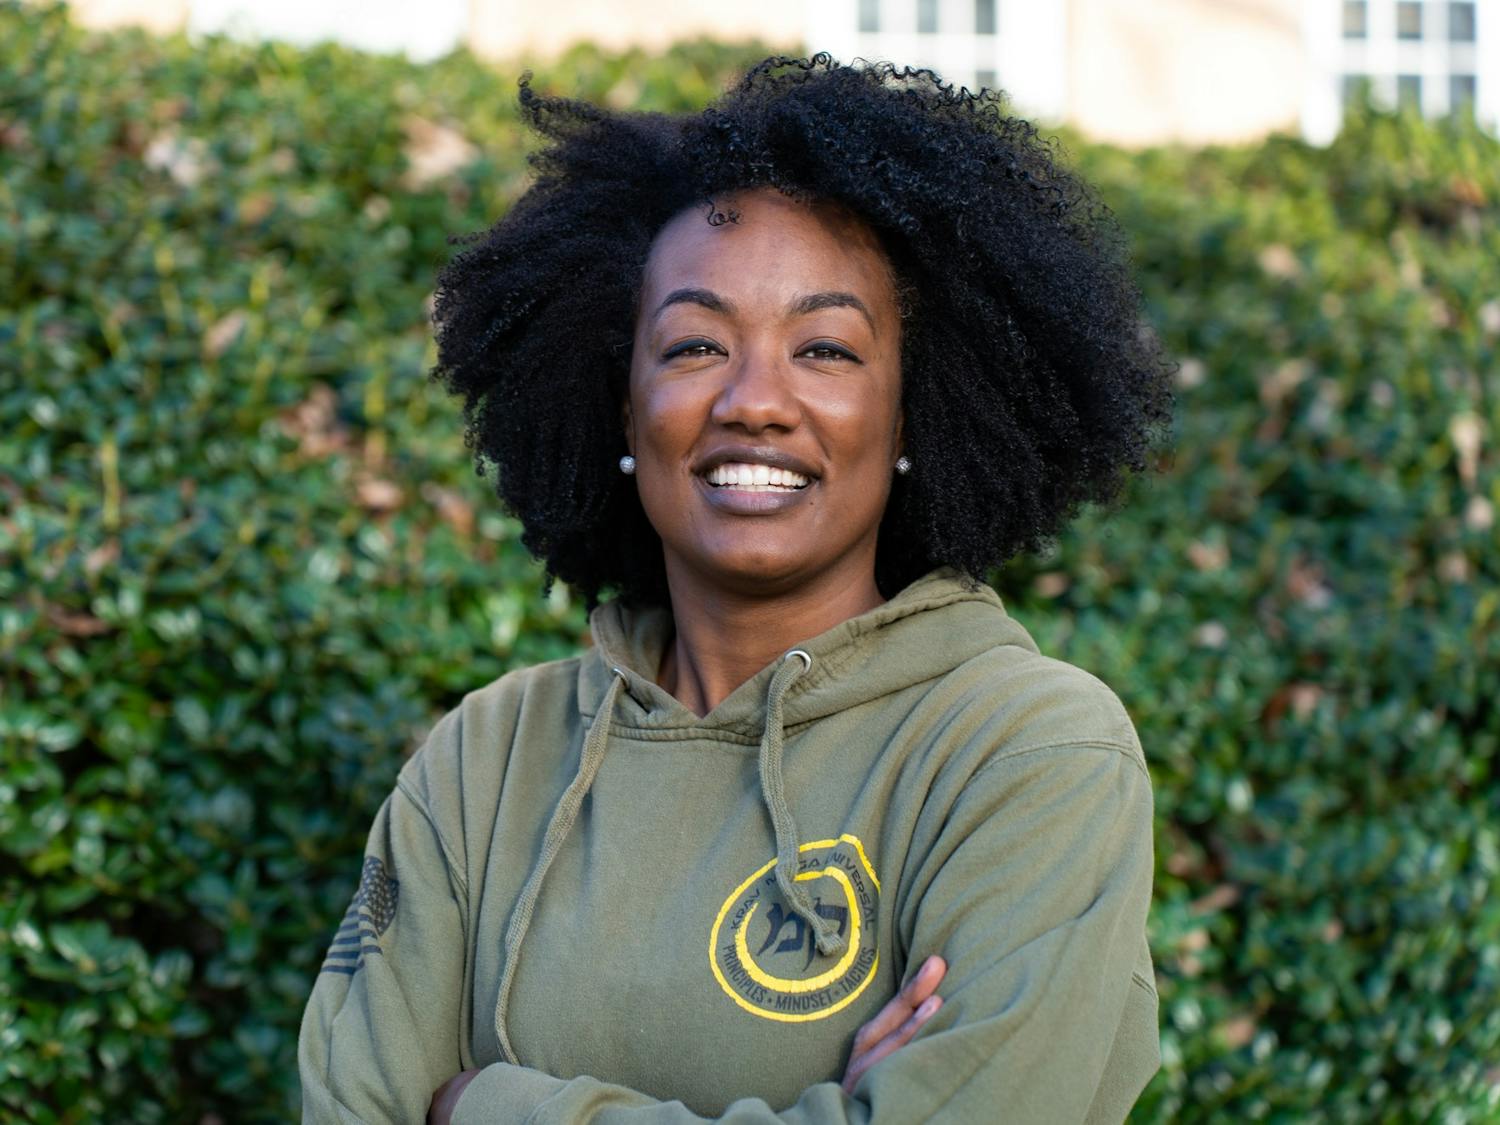 Jaimie Lee, owner and lead instructor at The Coalition NC, poses for a portrait in the Old Quad on Tuesday, Feb. 21, 2023.